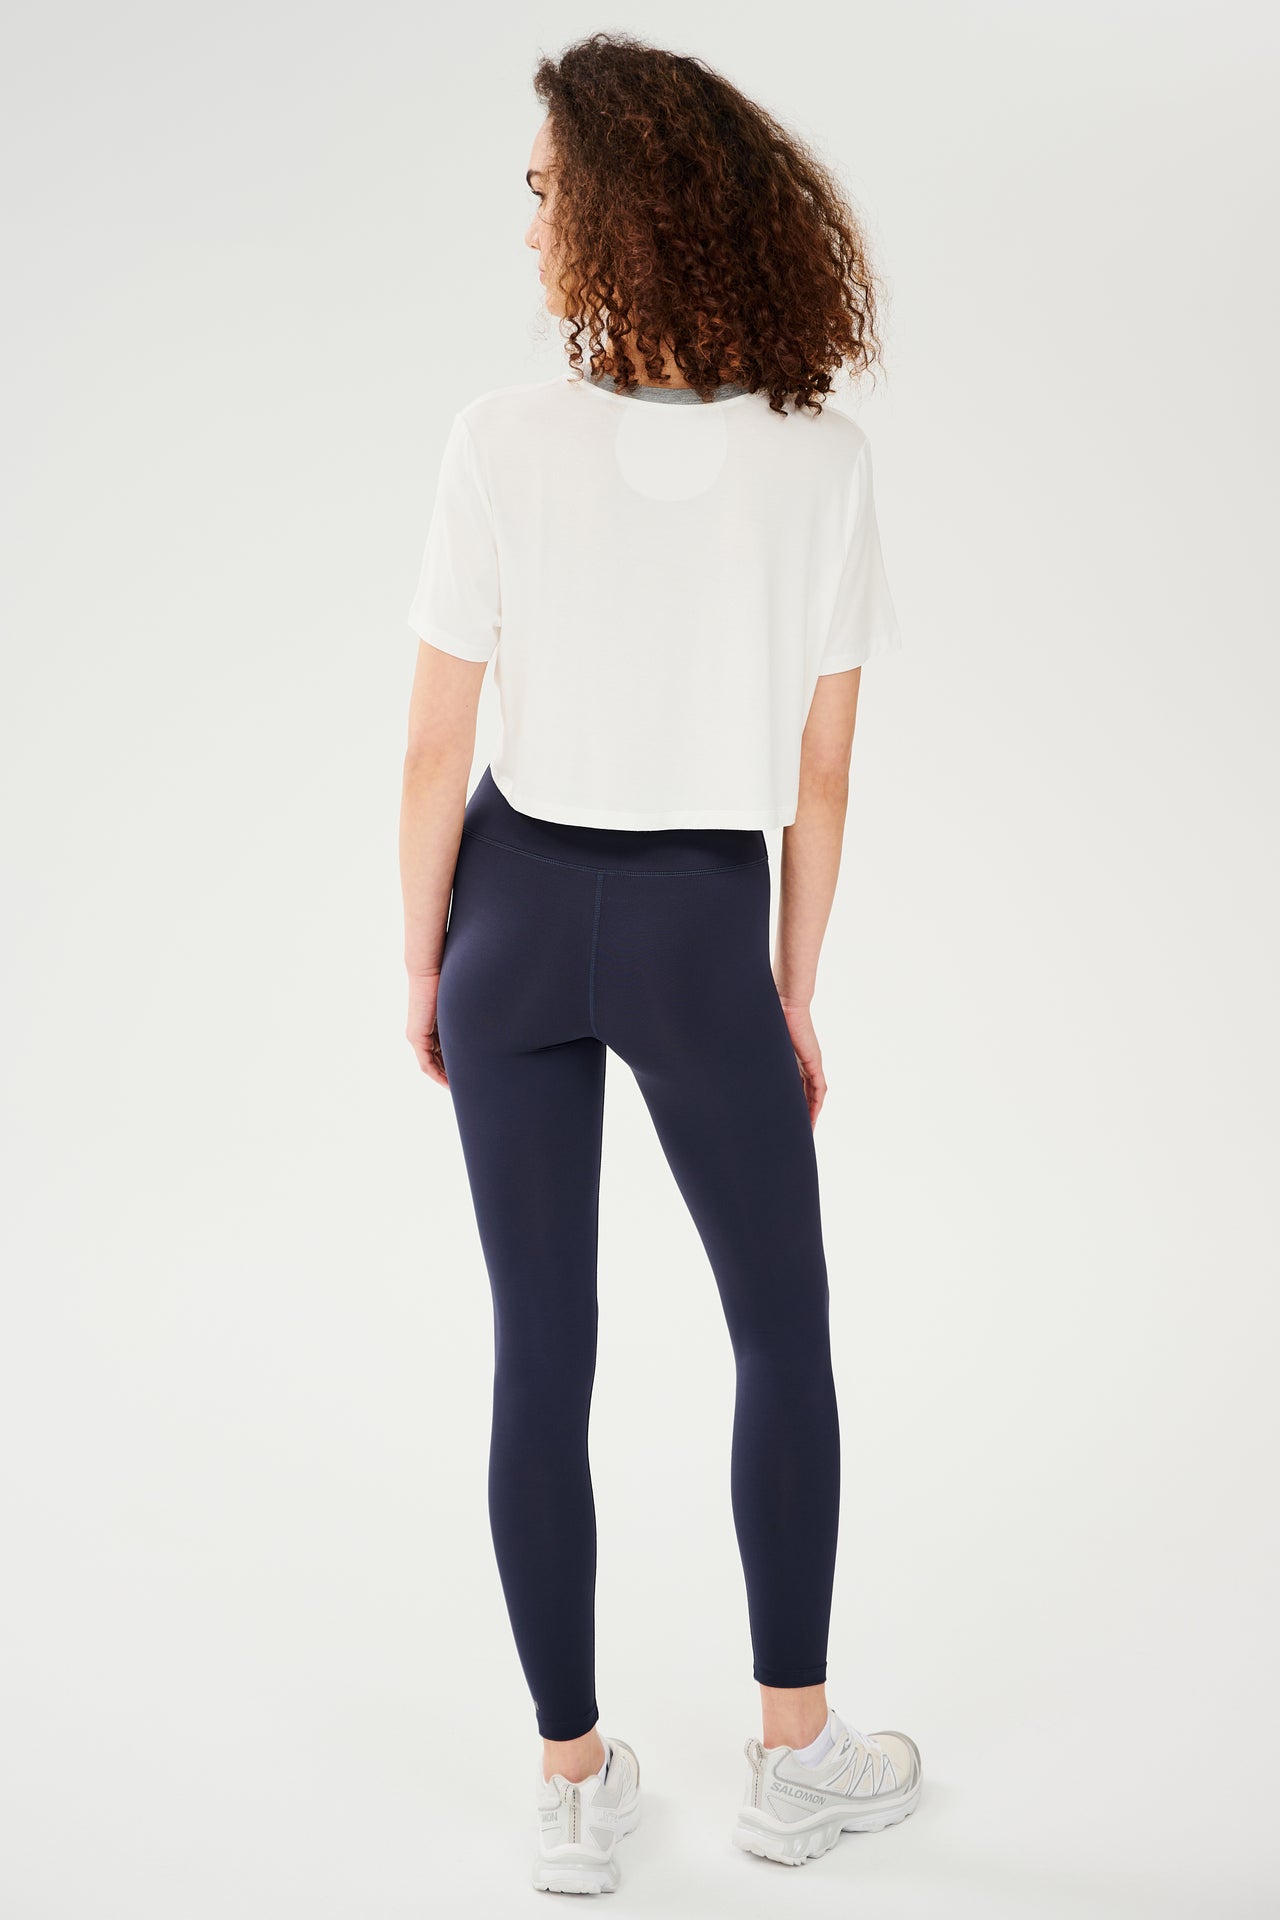 Full back view of girl wearing white cropped short sleeve t-shirt with thin light grey neck hem and dark blue leggings with white shoes